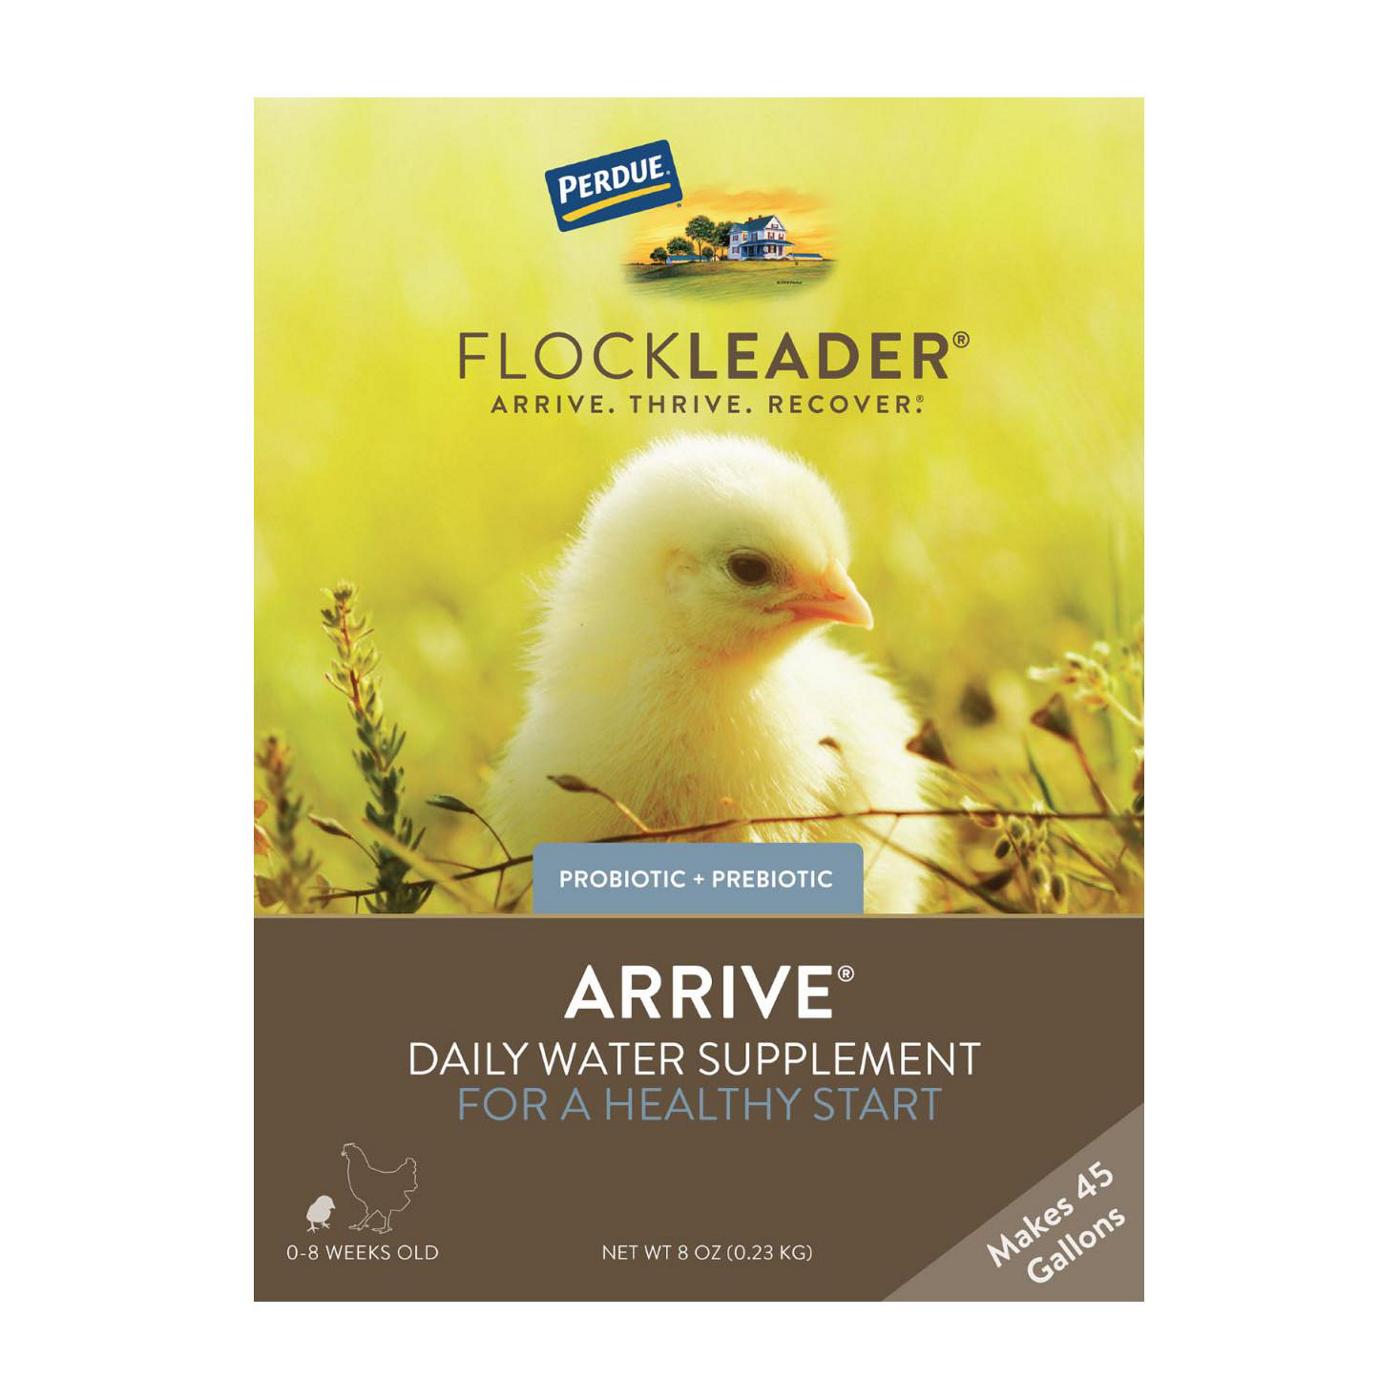 Flockleader Arrive Daily Water Supplement; image 1 of 3